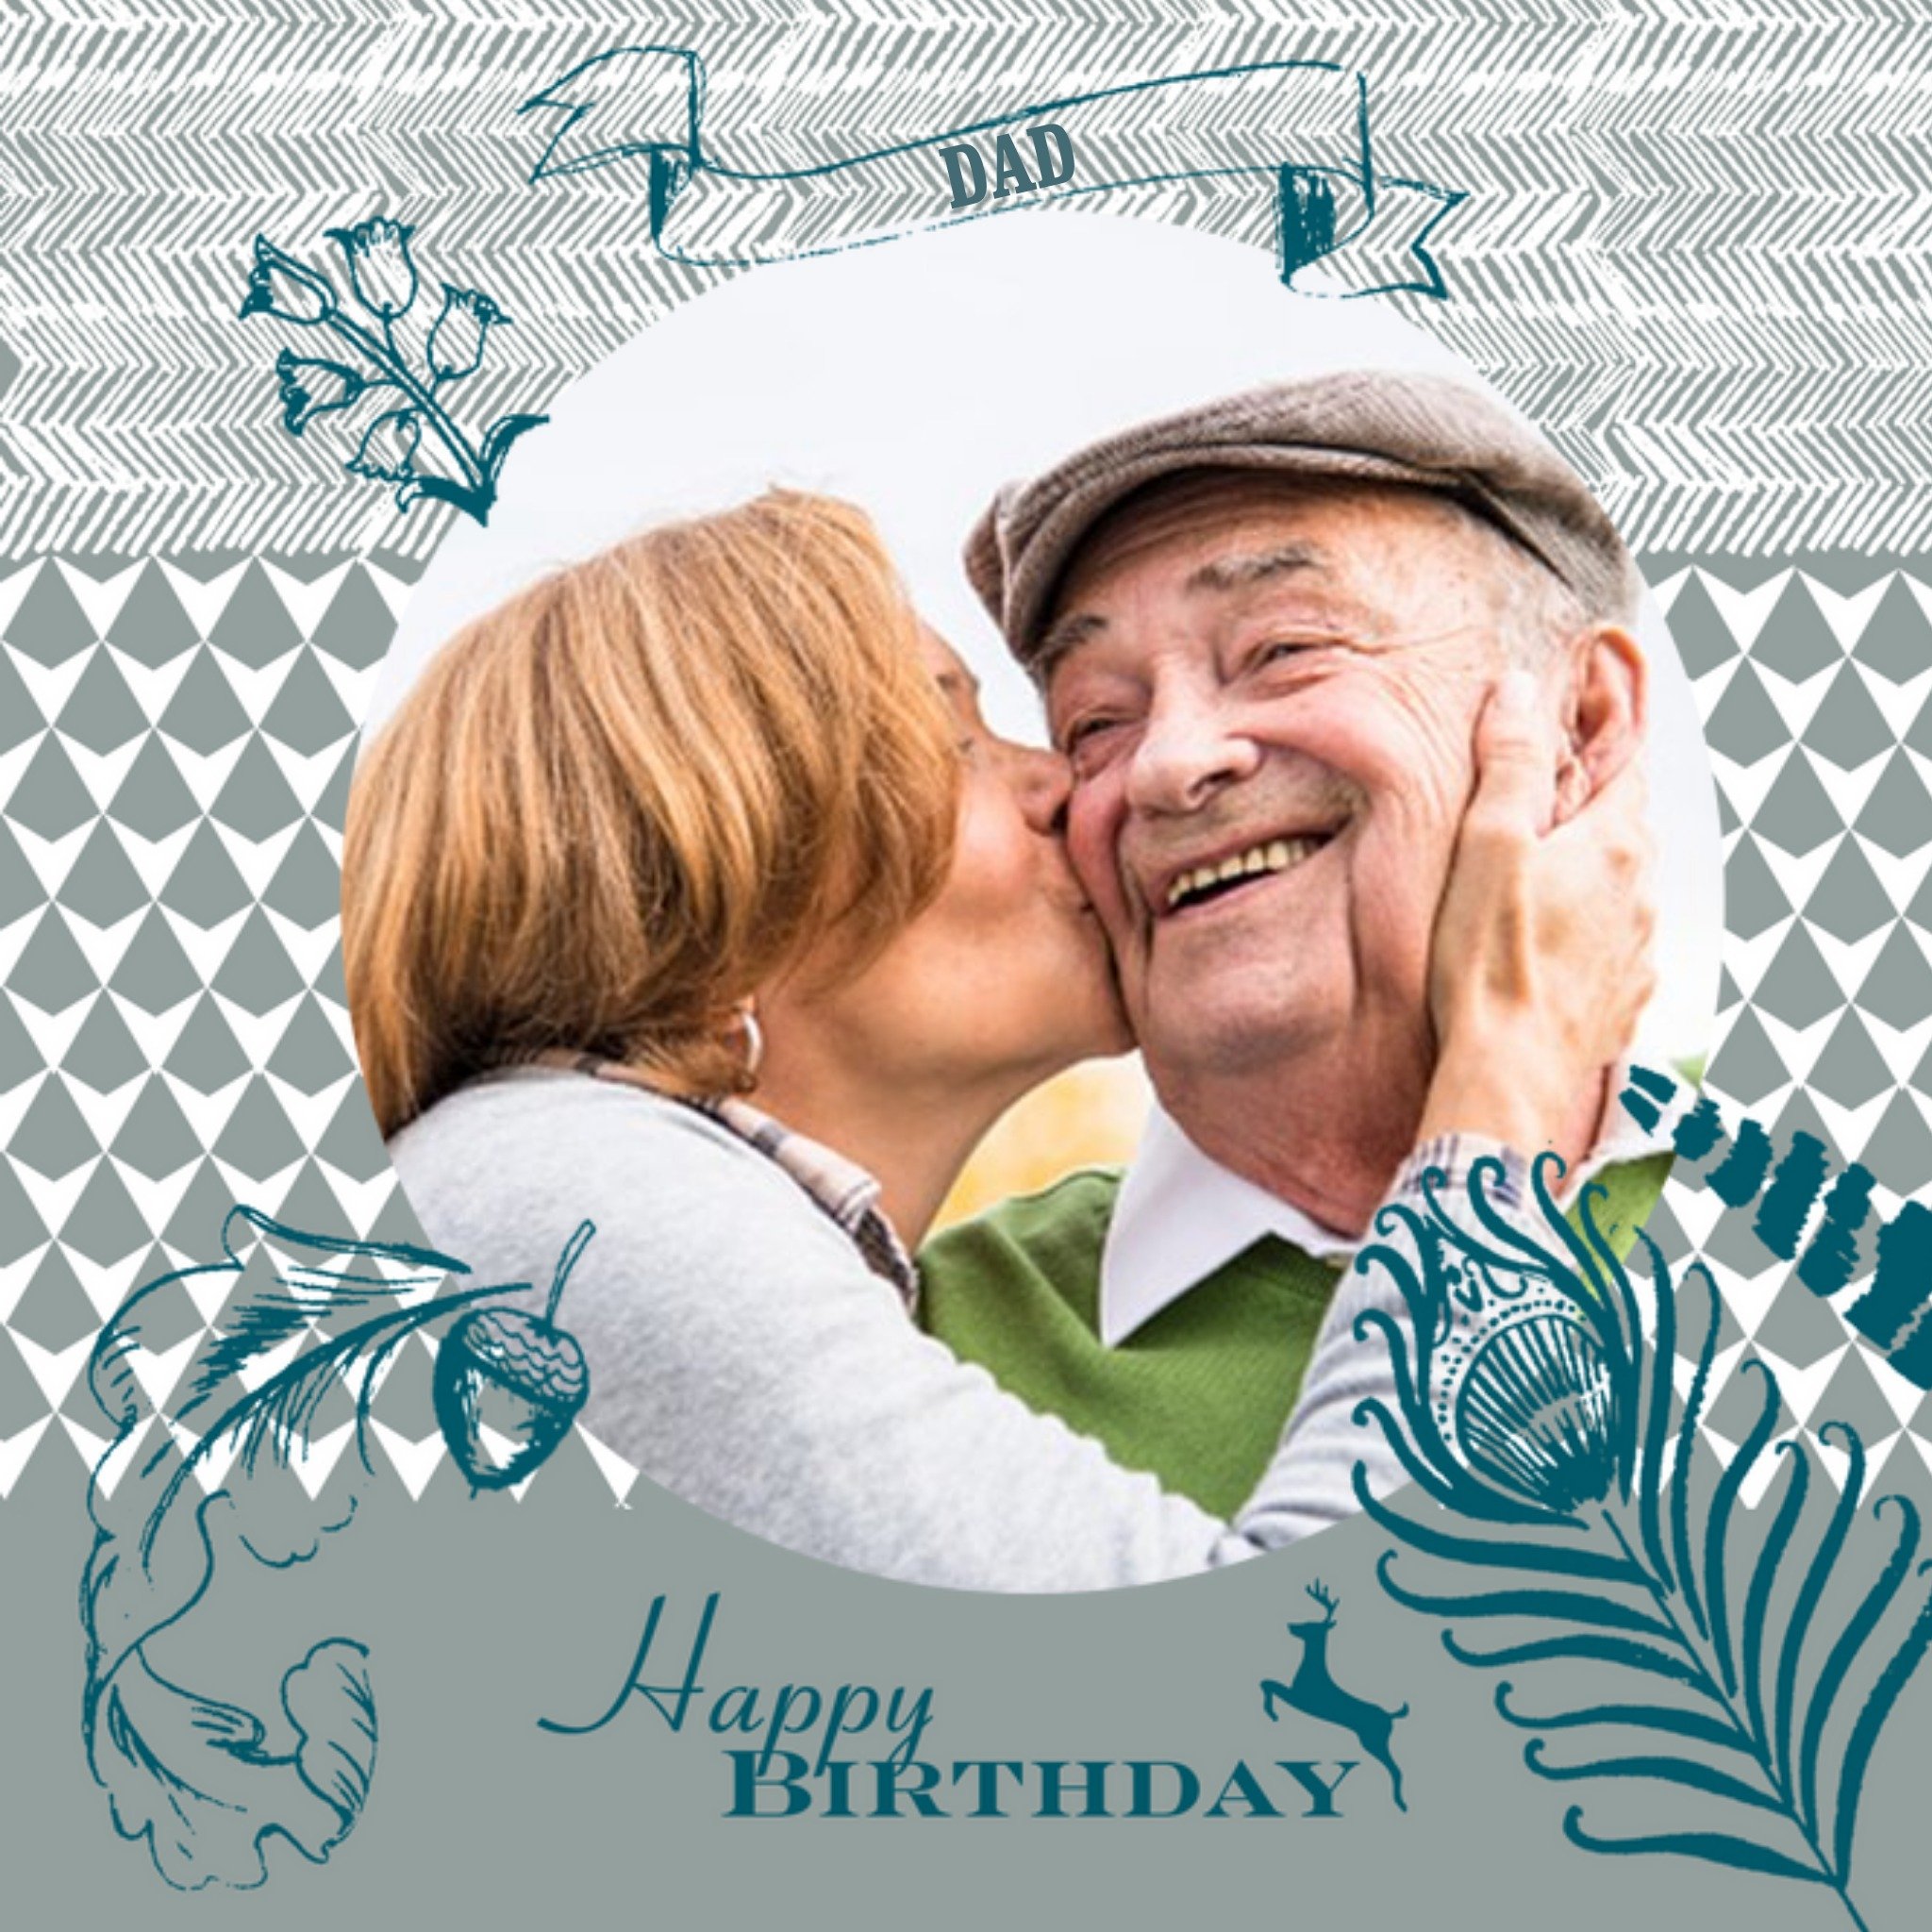 Moonpig Grey And Turquoise Personalised Photo Upload Happy Birthday Card For Dad, Square